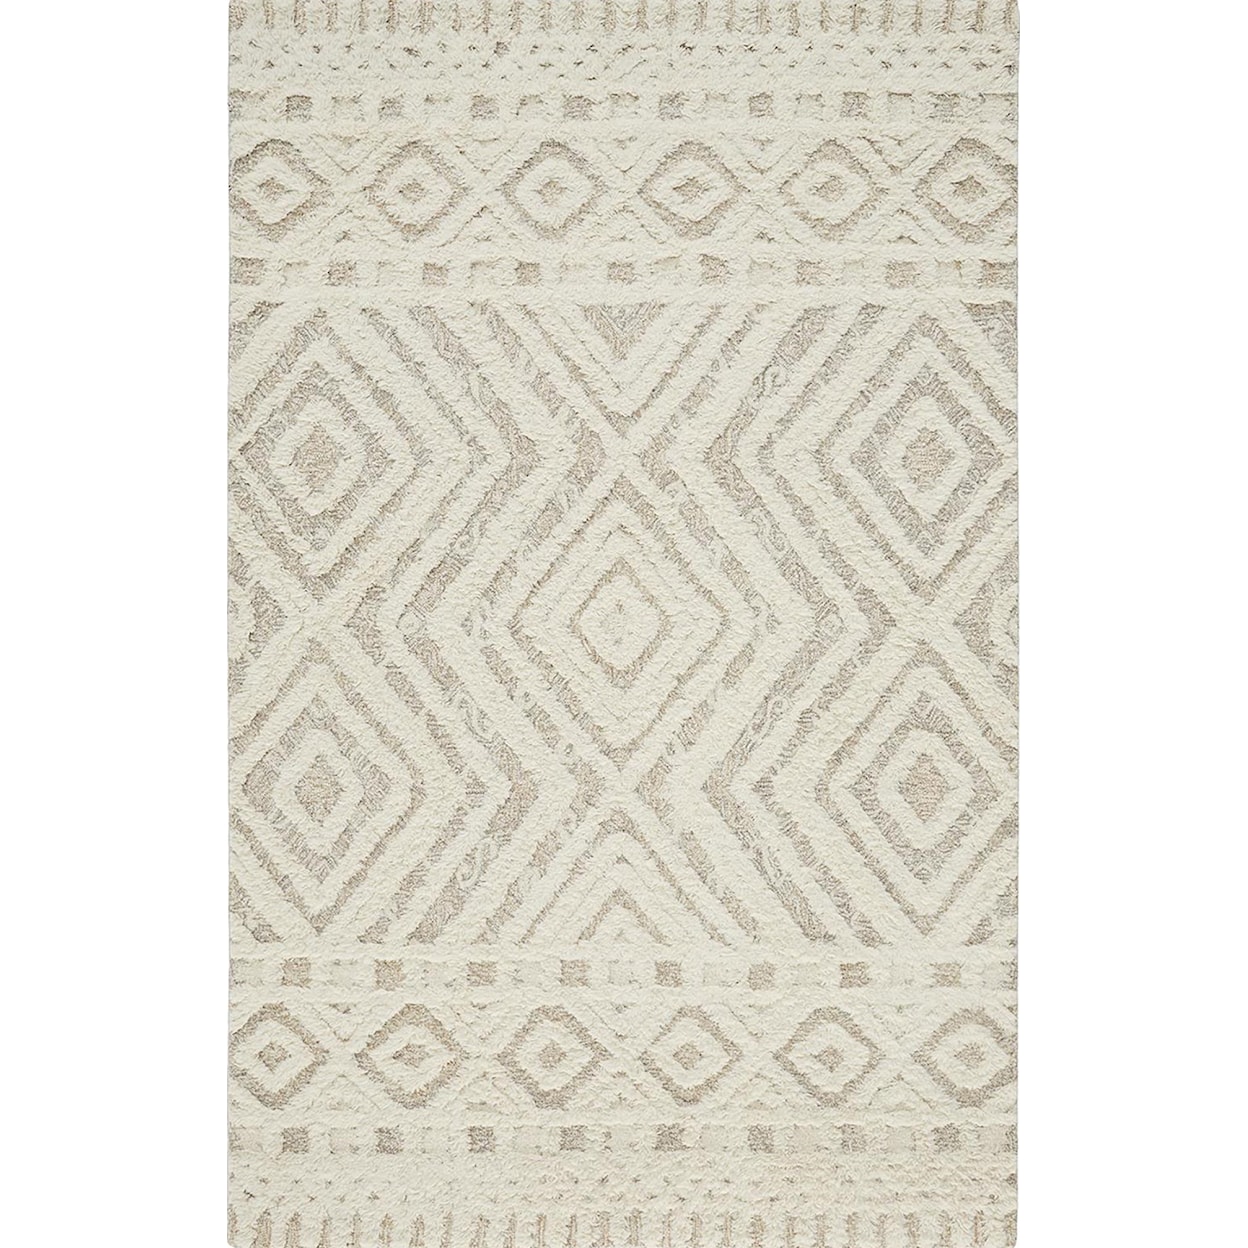 Feizy Rugs Anica 8 x 10 Area Rug